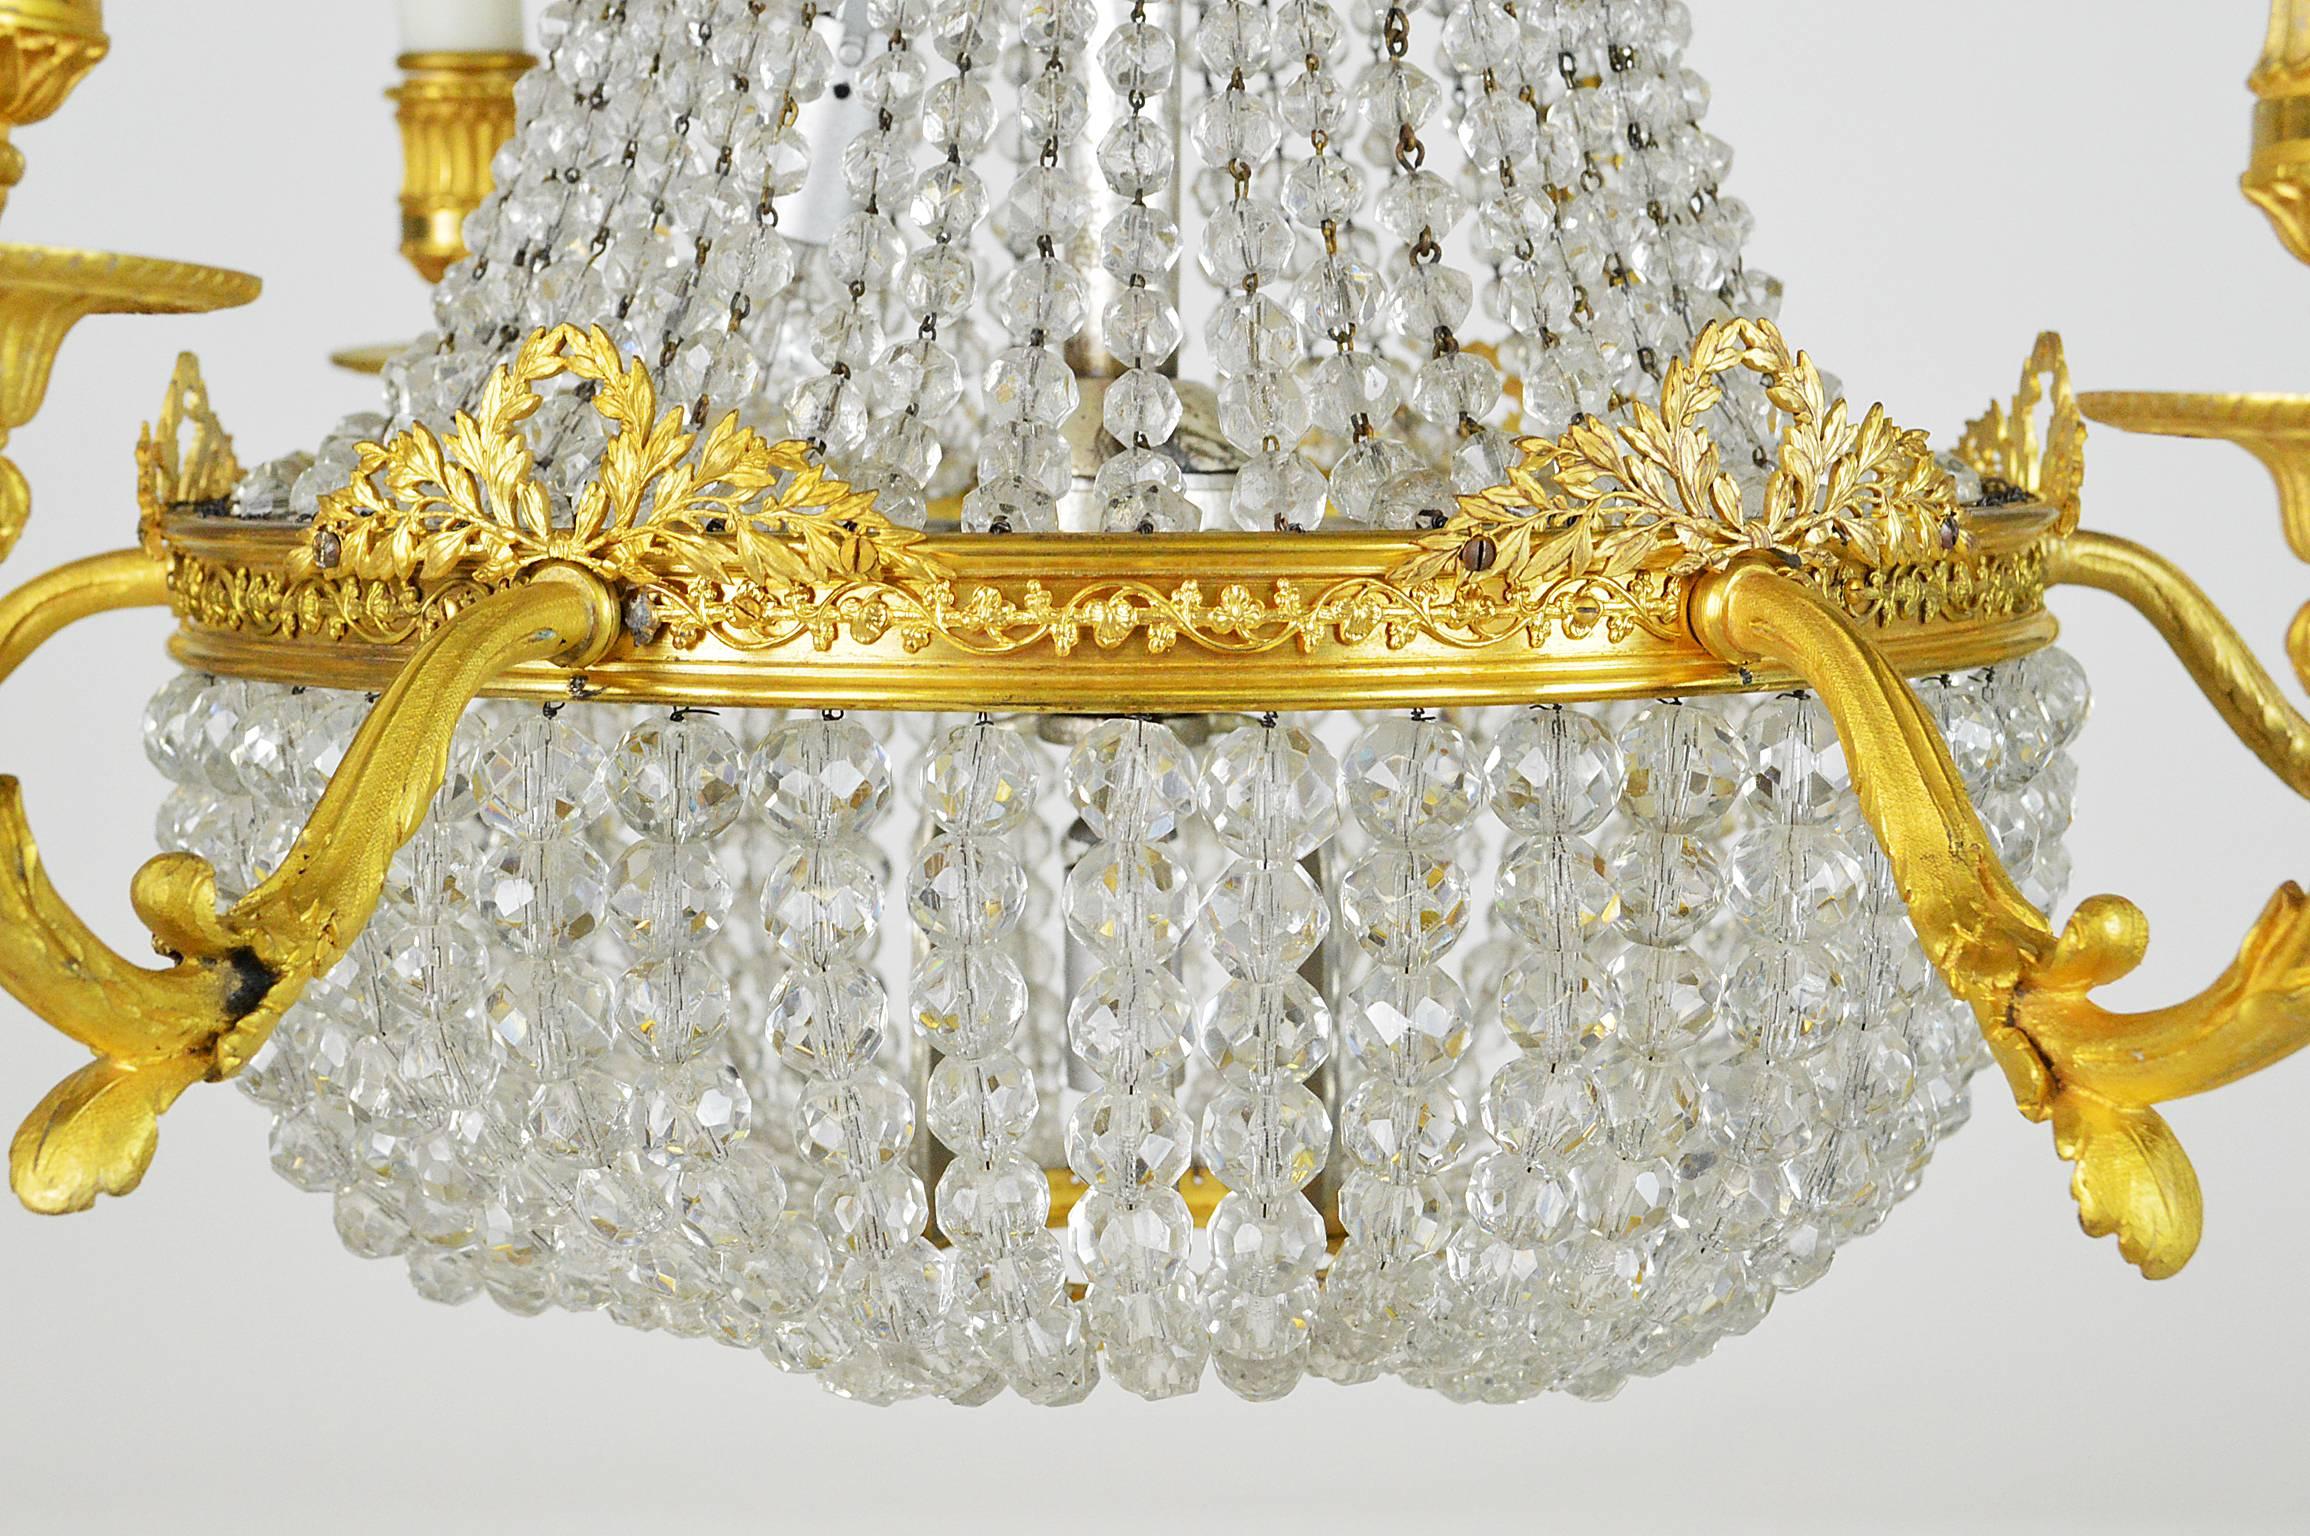 French Empire Style Gilt Bronze and Beaded Six-Light Chandelier For Sale 2